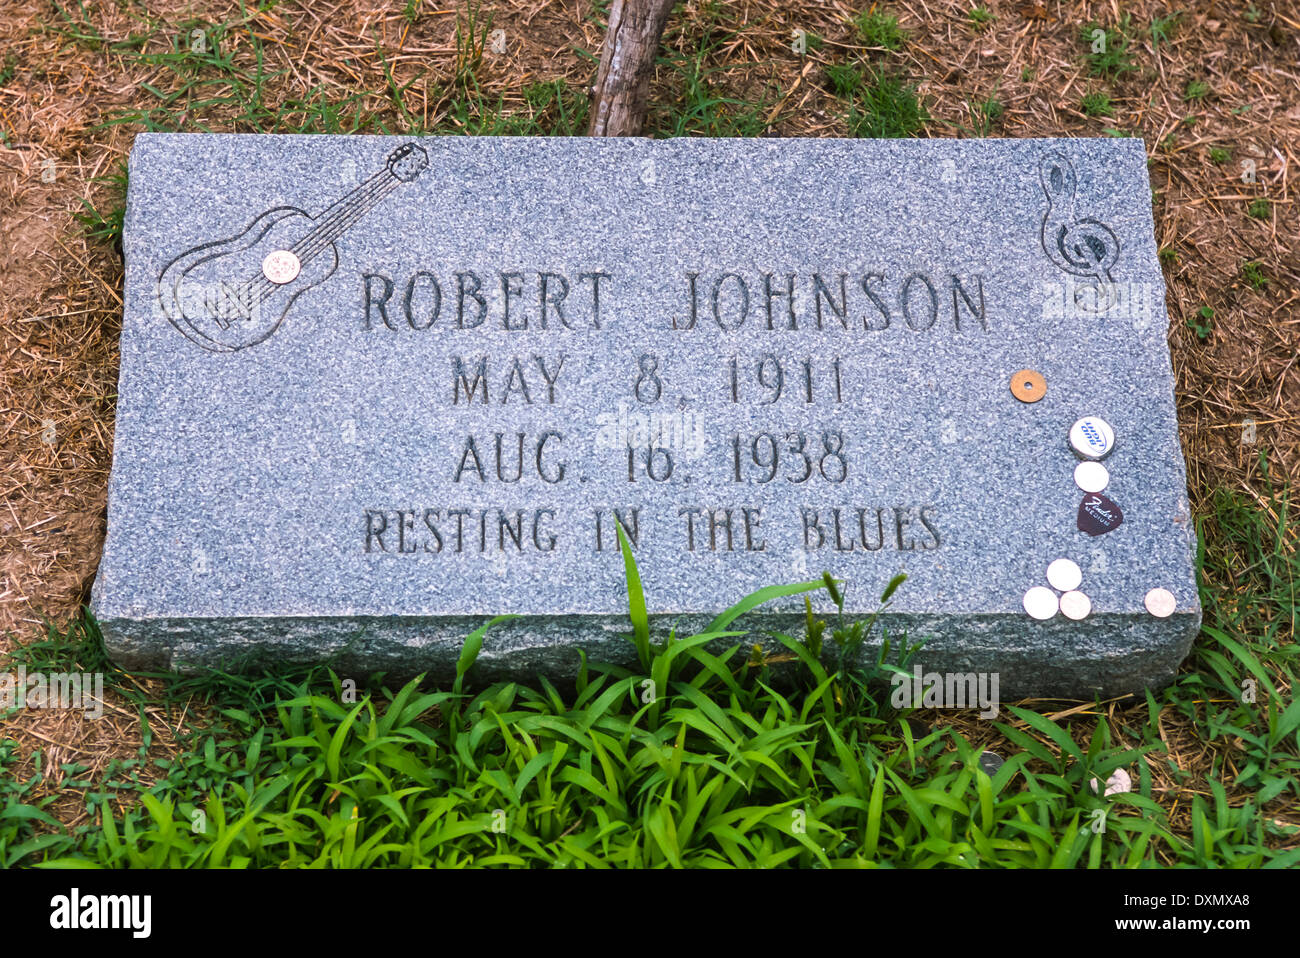 MISSISSIPPI, USA - Grave marker possible burial site of Robert Johnson, delta blues musician, cemetery Payne Chapel M. B. Church Stock Photo